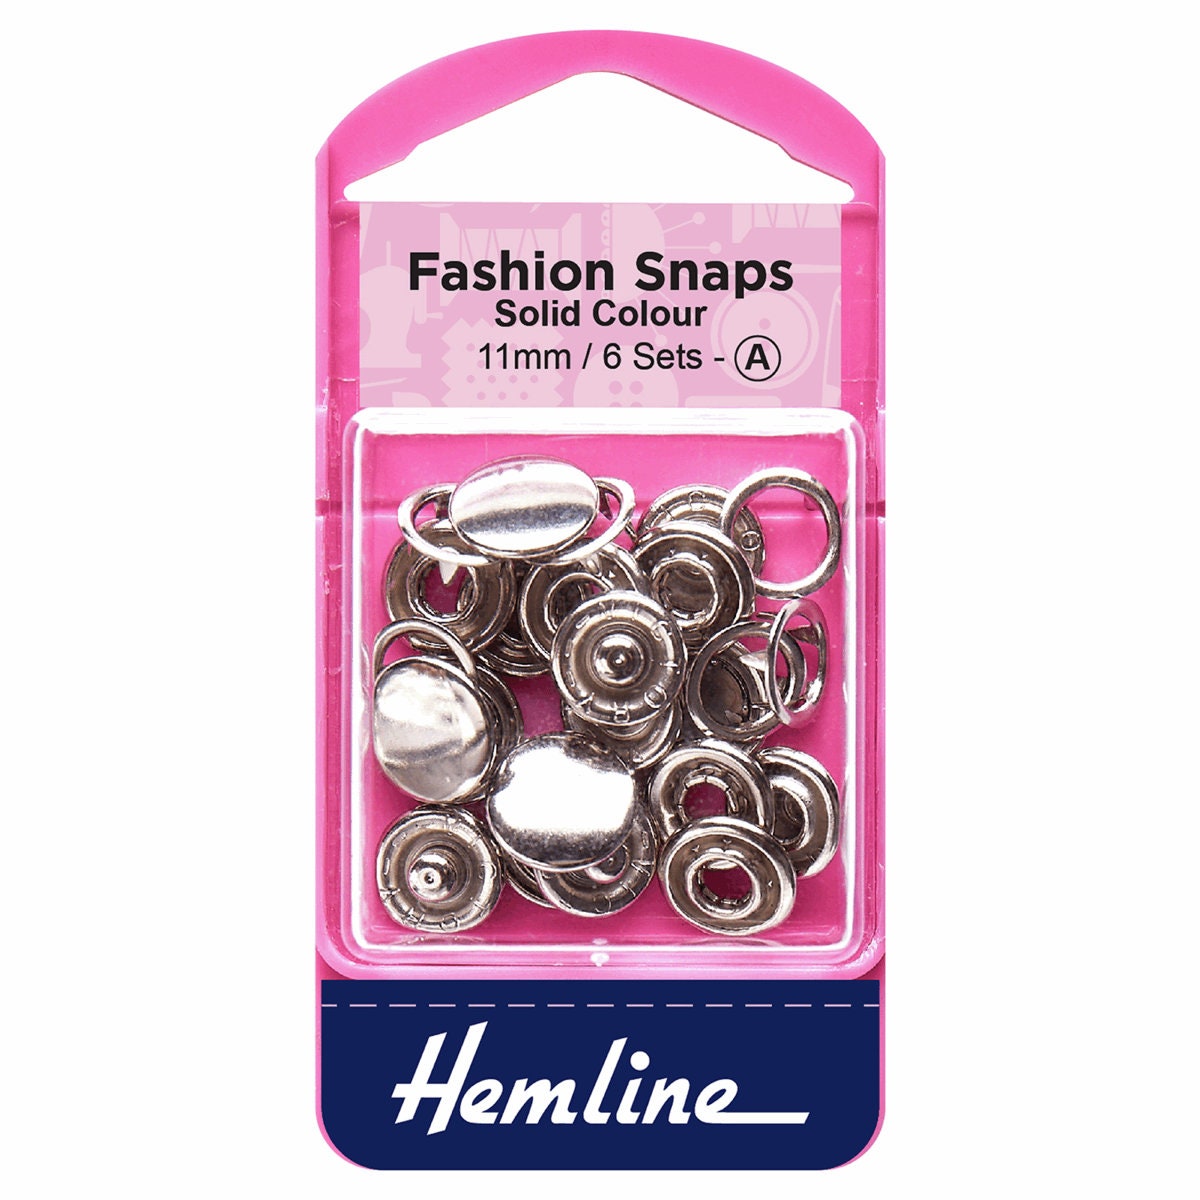 Snap Fastener Kit With 20 Snaps and Setting Tool for Thinner Materials. 